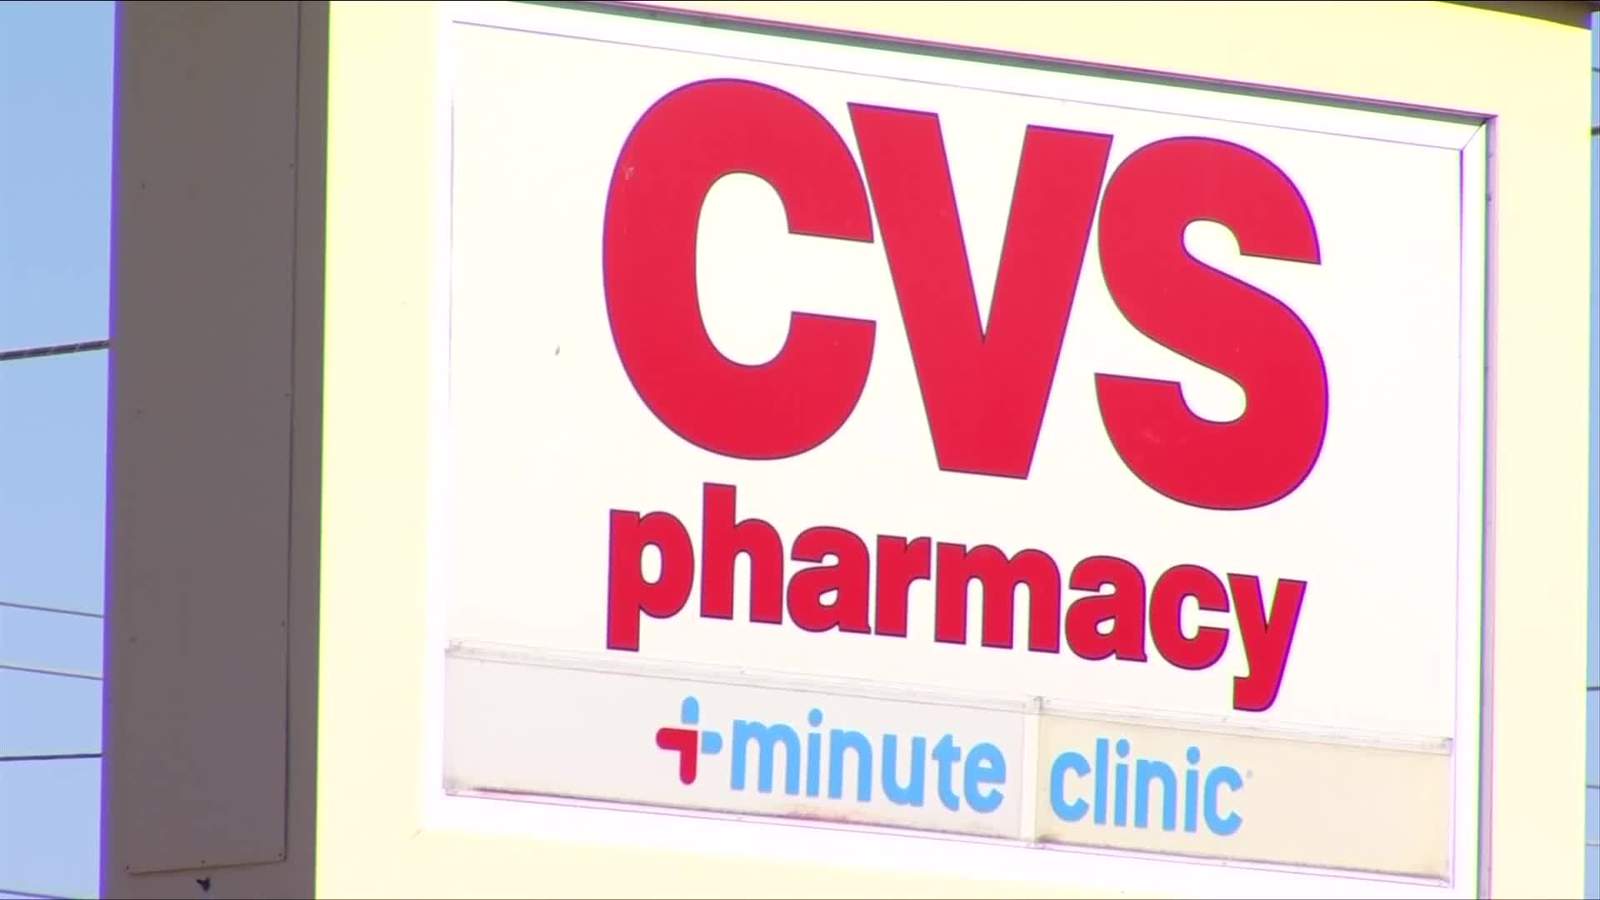 CVS calls Roanoke man for first COVID vaccine dose, doesn’t guarantee his second dose